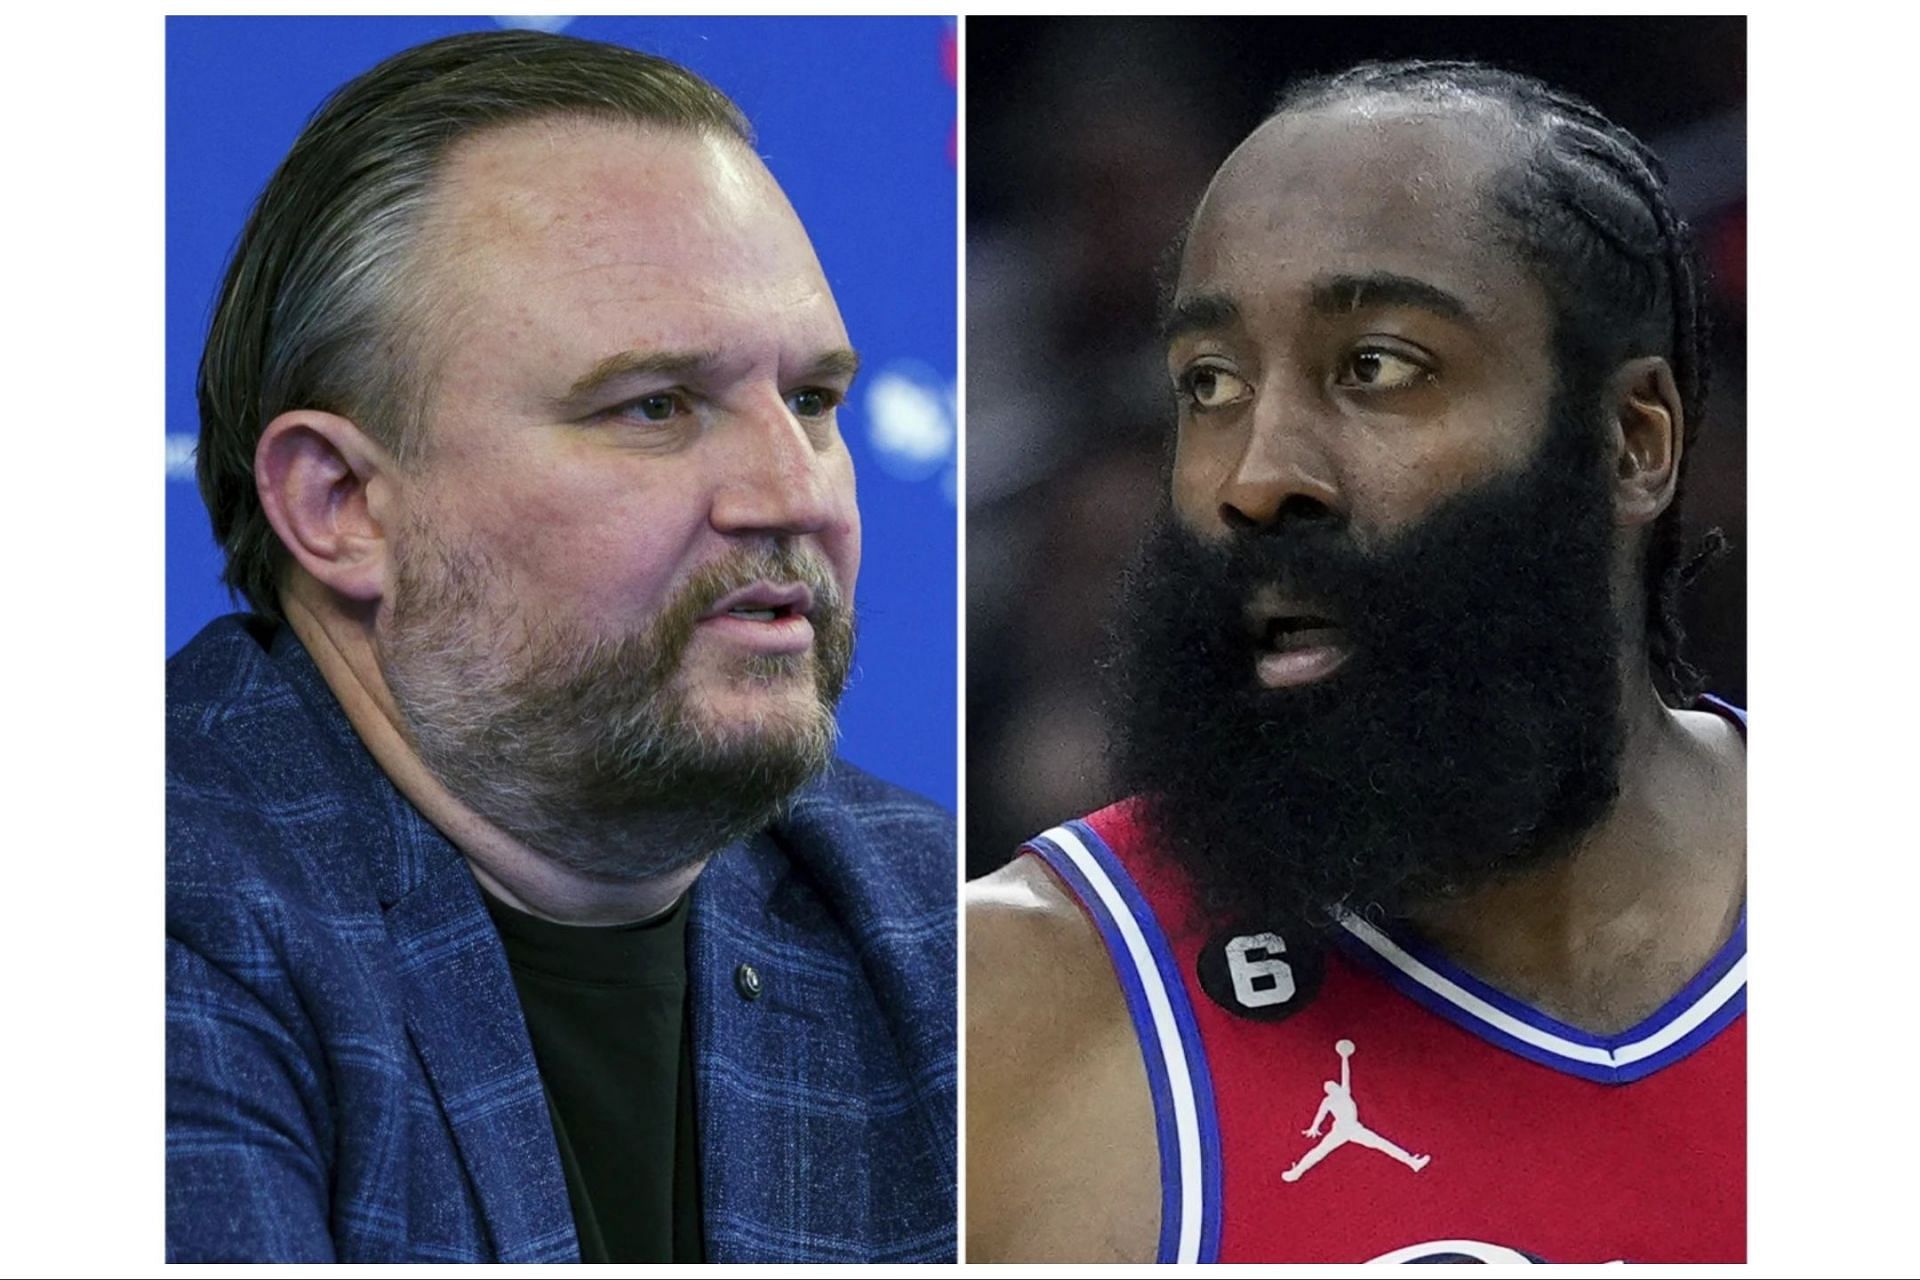 James Harden (right) says Daryl Morey (left) promised to offer him a max contract in the offseason, but never fulfilled his promise (AP Photo)